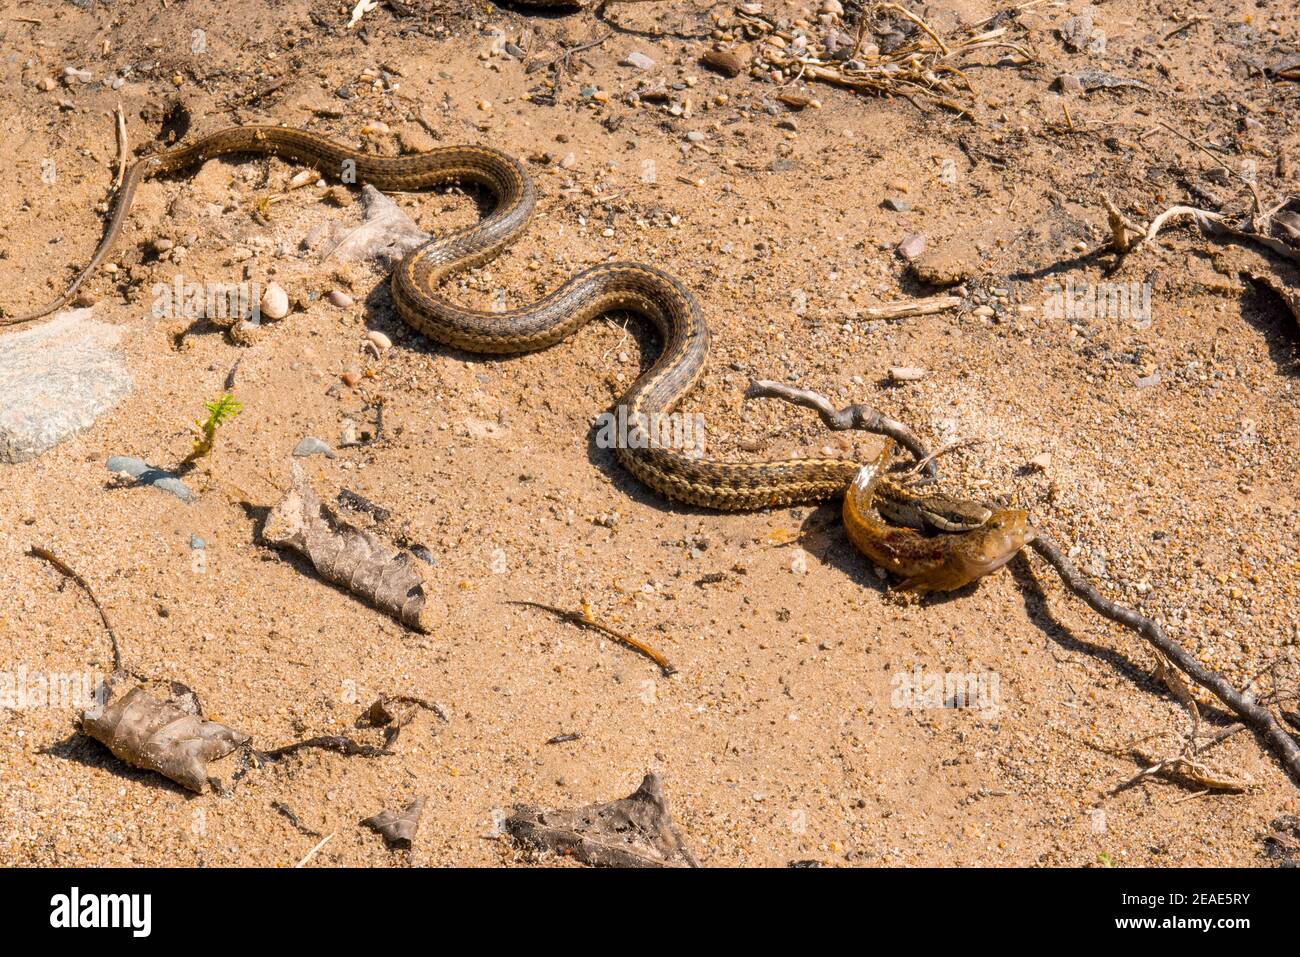 An aquatic common garter snake (Thamnophis sirtalis) with a Rocky Mountain sculpin (Cottus bondi) in its mouth, on a sandy river bank. Stock Photo